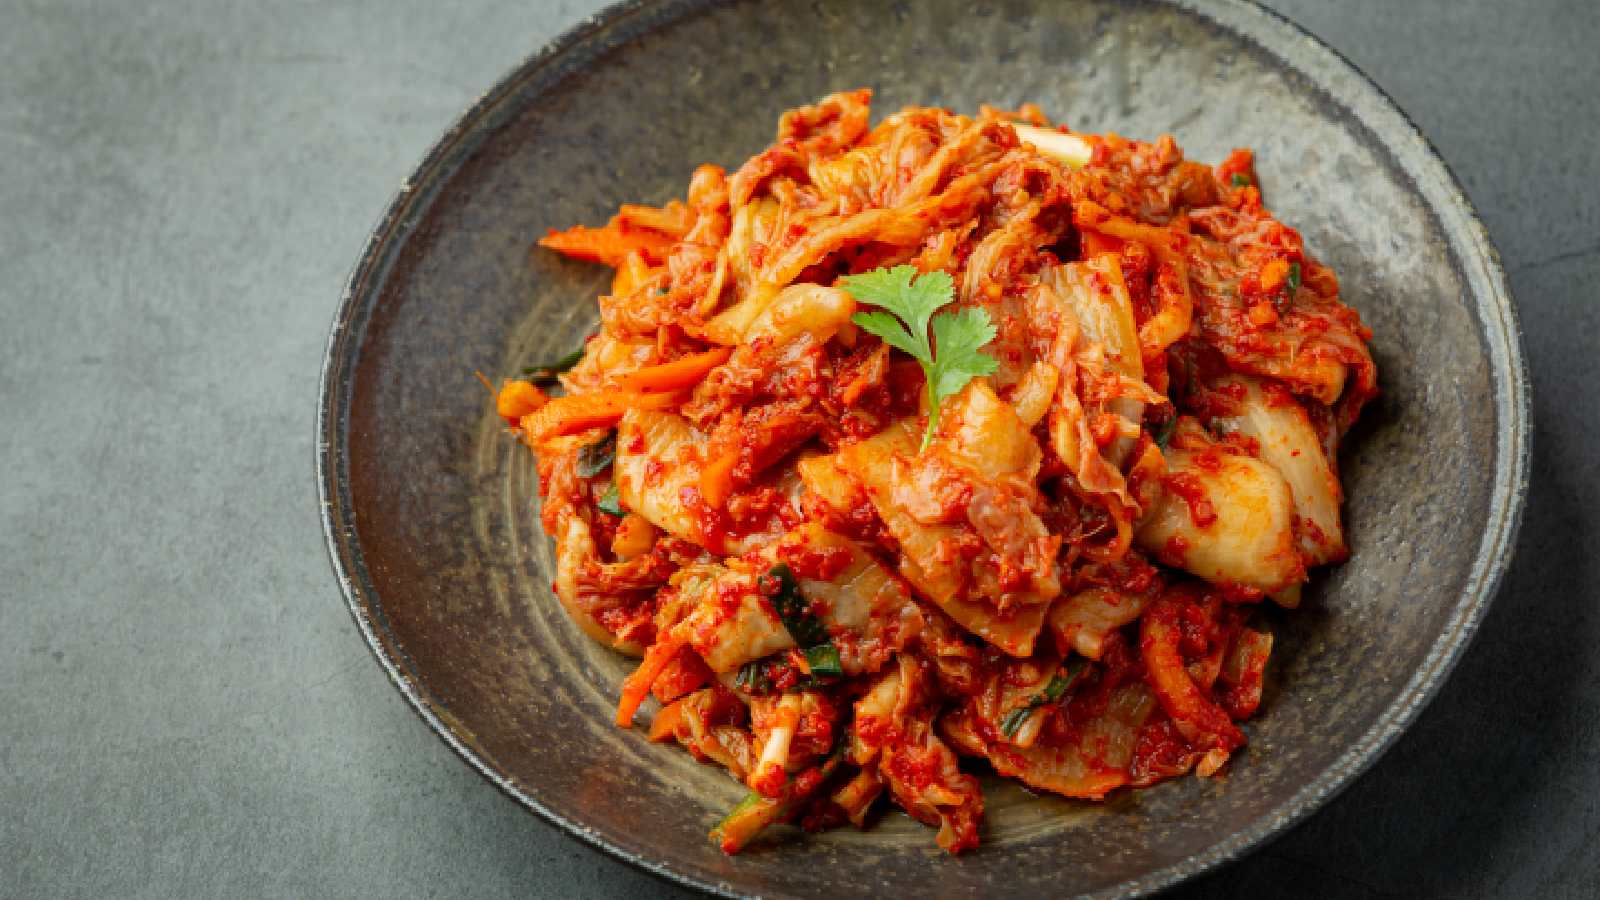 Kimchi: Benefits and side effects